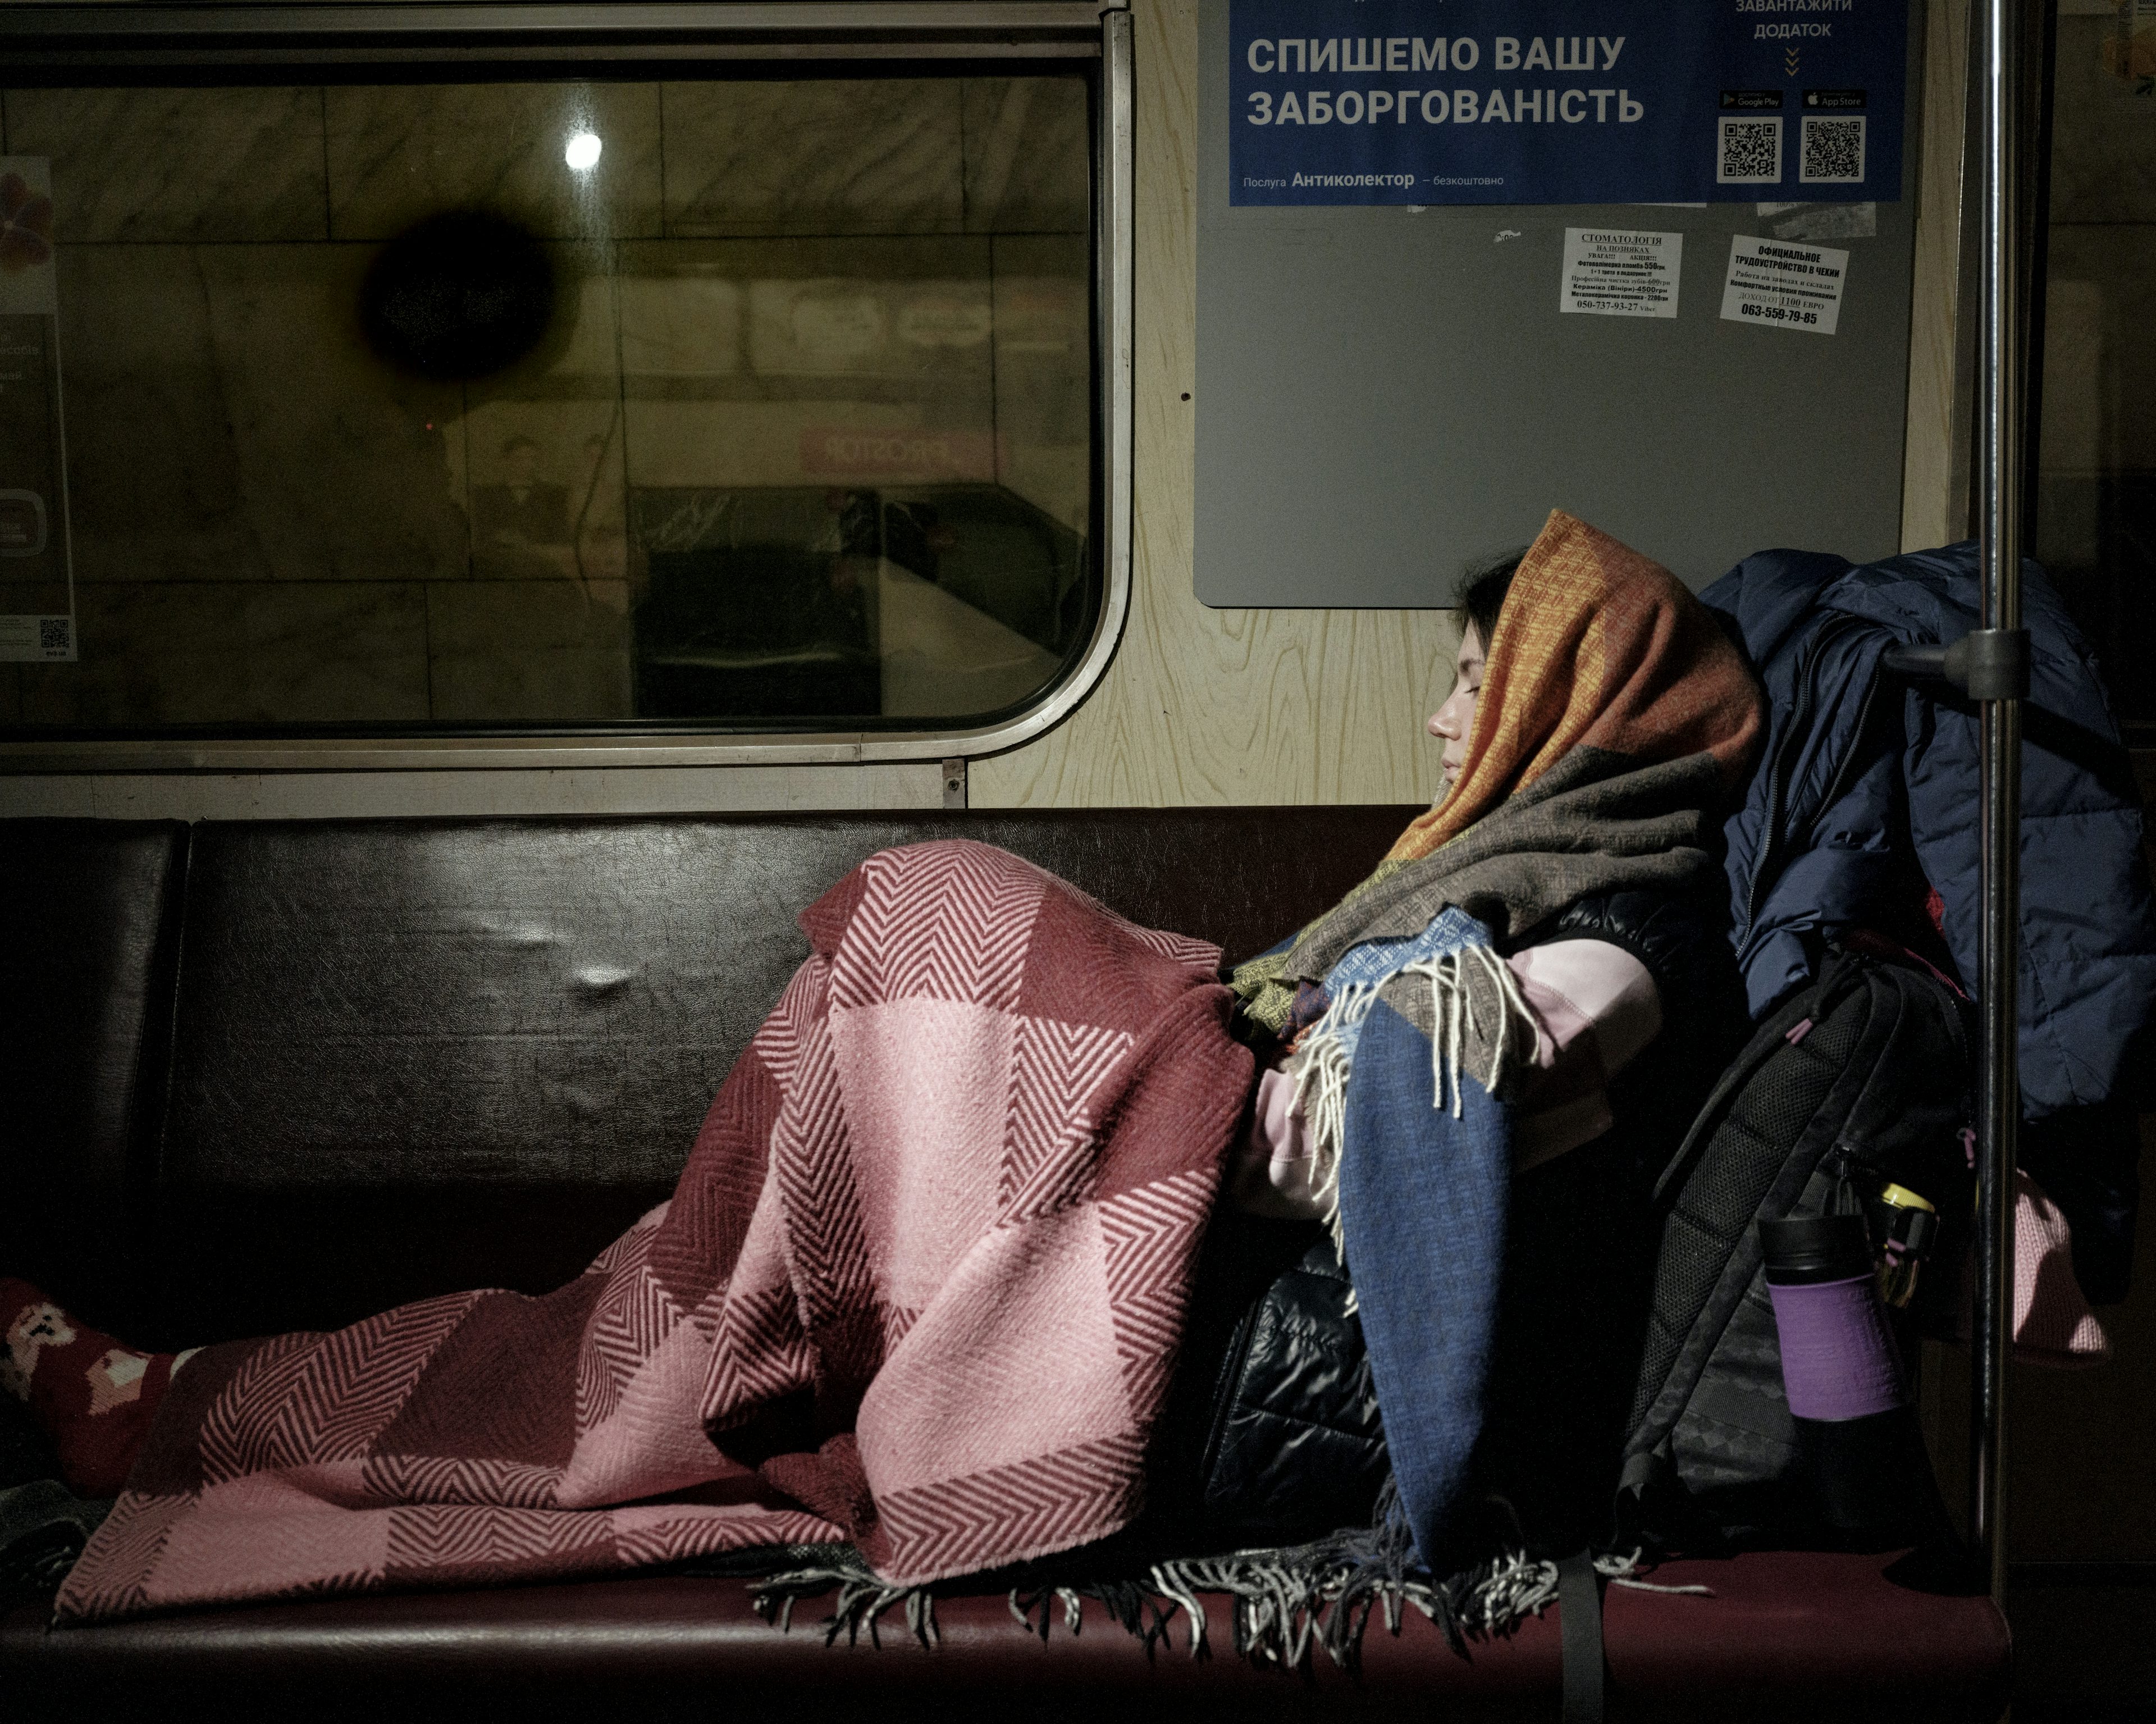 UKRAINE. Kyiv. 4 March 2022. Oksana, a young girl, has moved to live in this metro carriage parked underground to protect herself from the artillery fire of the Russian army. Photo by Lorenzo Meloni